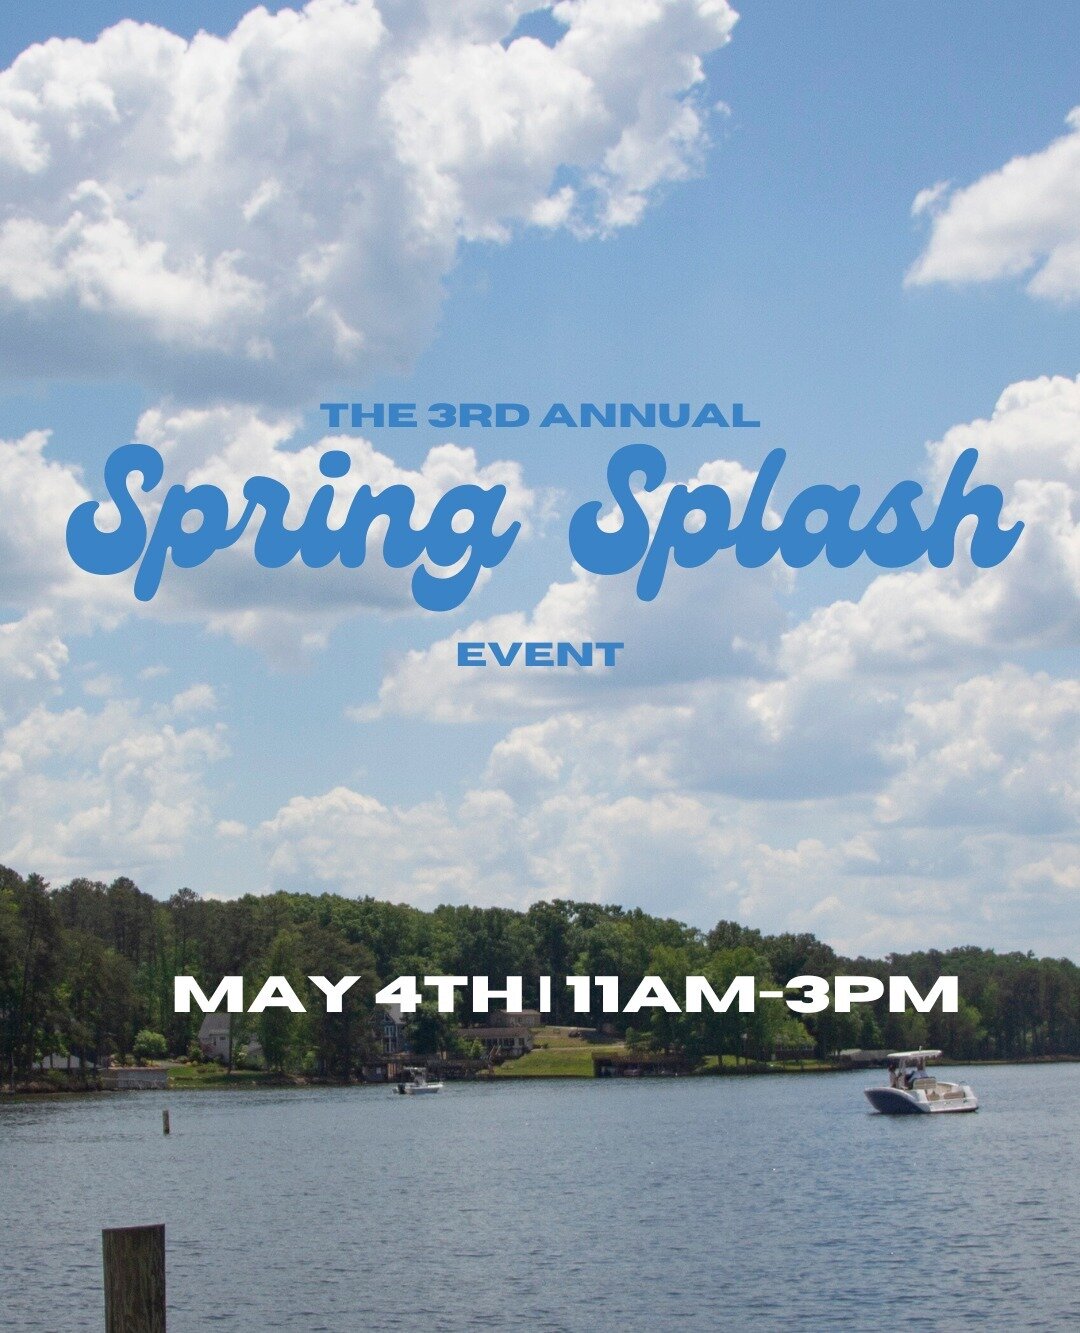 Happy Easter Weekend! 🐰🪺🌷 We hope you all have a beautiful weekend with friends &amp; family!⁠
⁠
Don't forget to tell everyone about Spring Splash this weekend! 💙⁠
*Reminder that the vendor form closes 4/24/24*⁠
⁠
⁠
Learn more on our website! &am